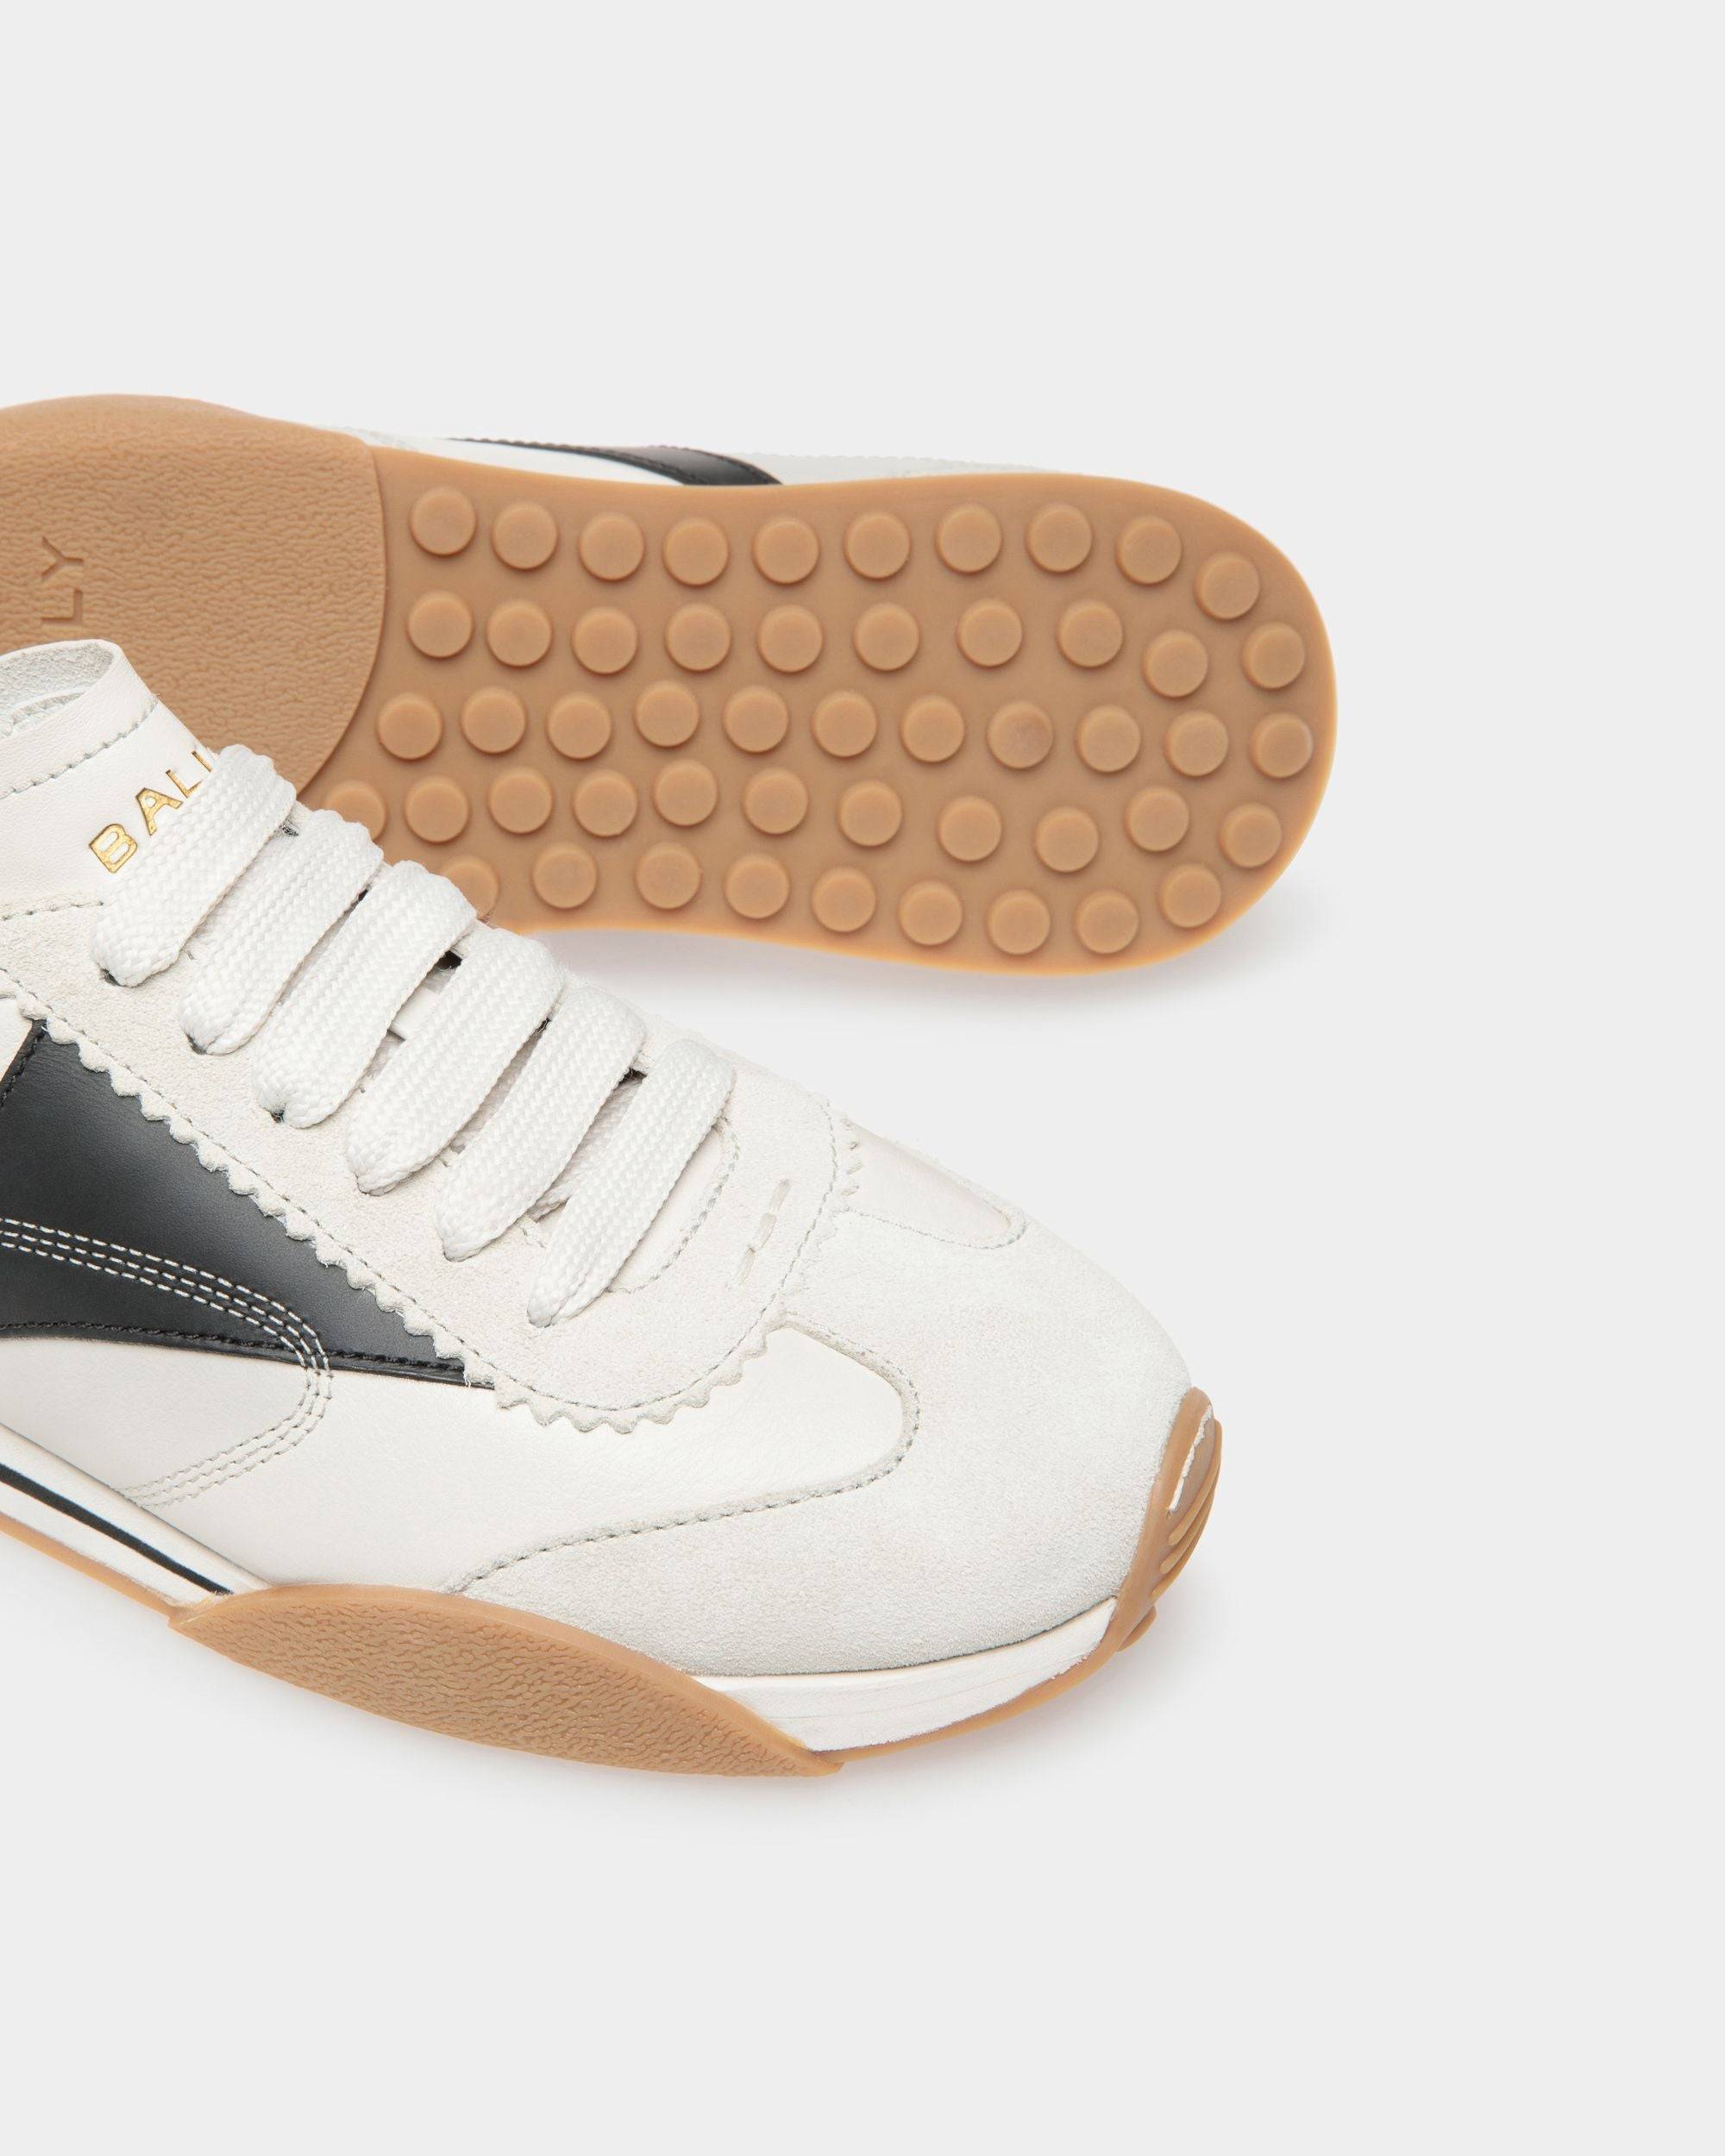 Sonney | Women's Sneakers | Dusty White And Black Leather | Bally | Still Life Below